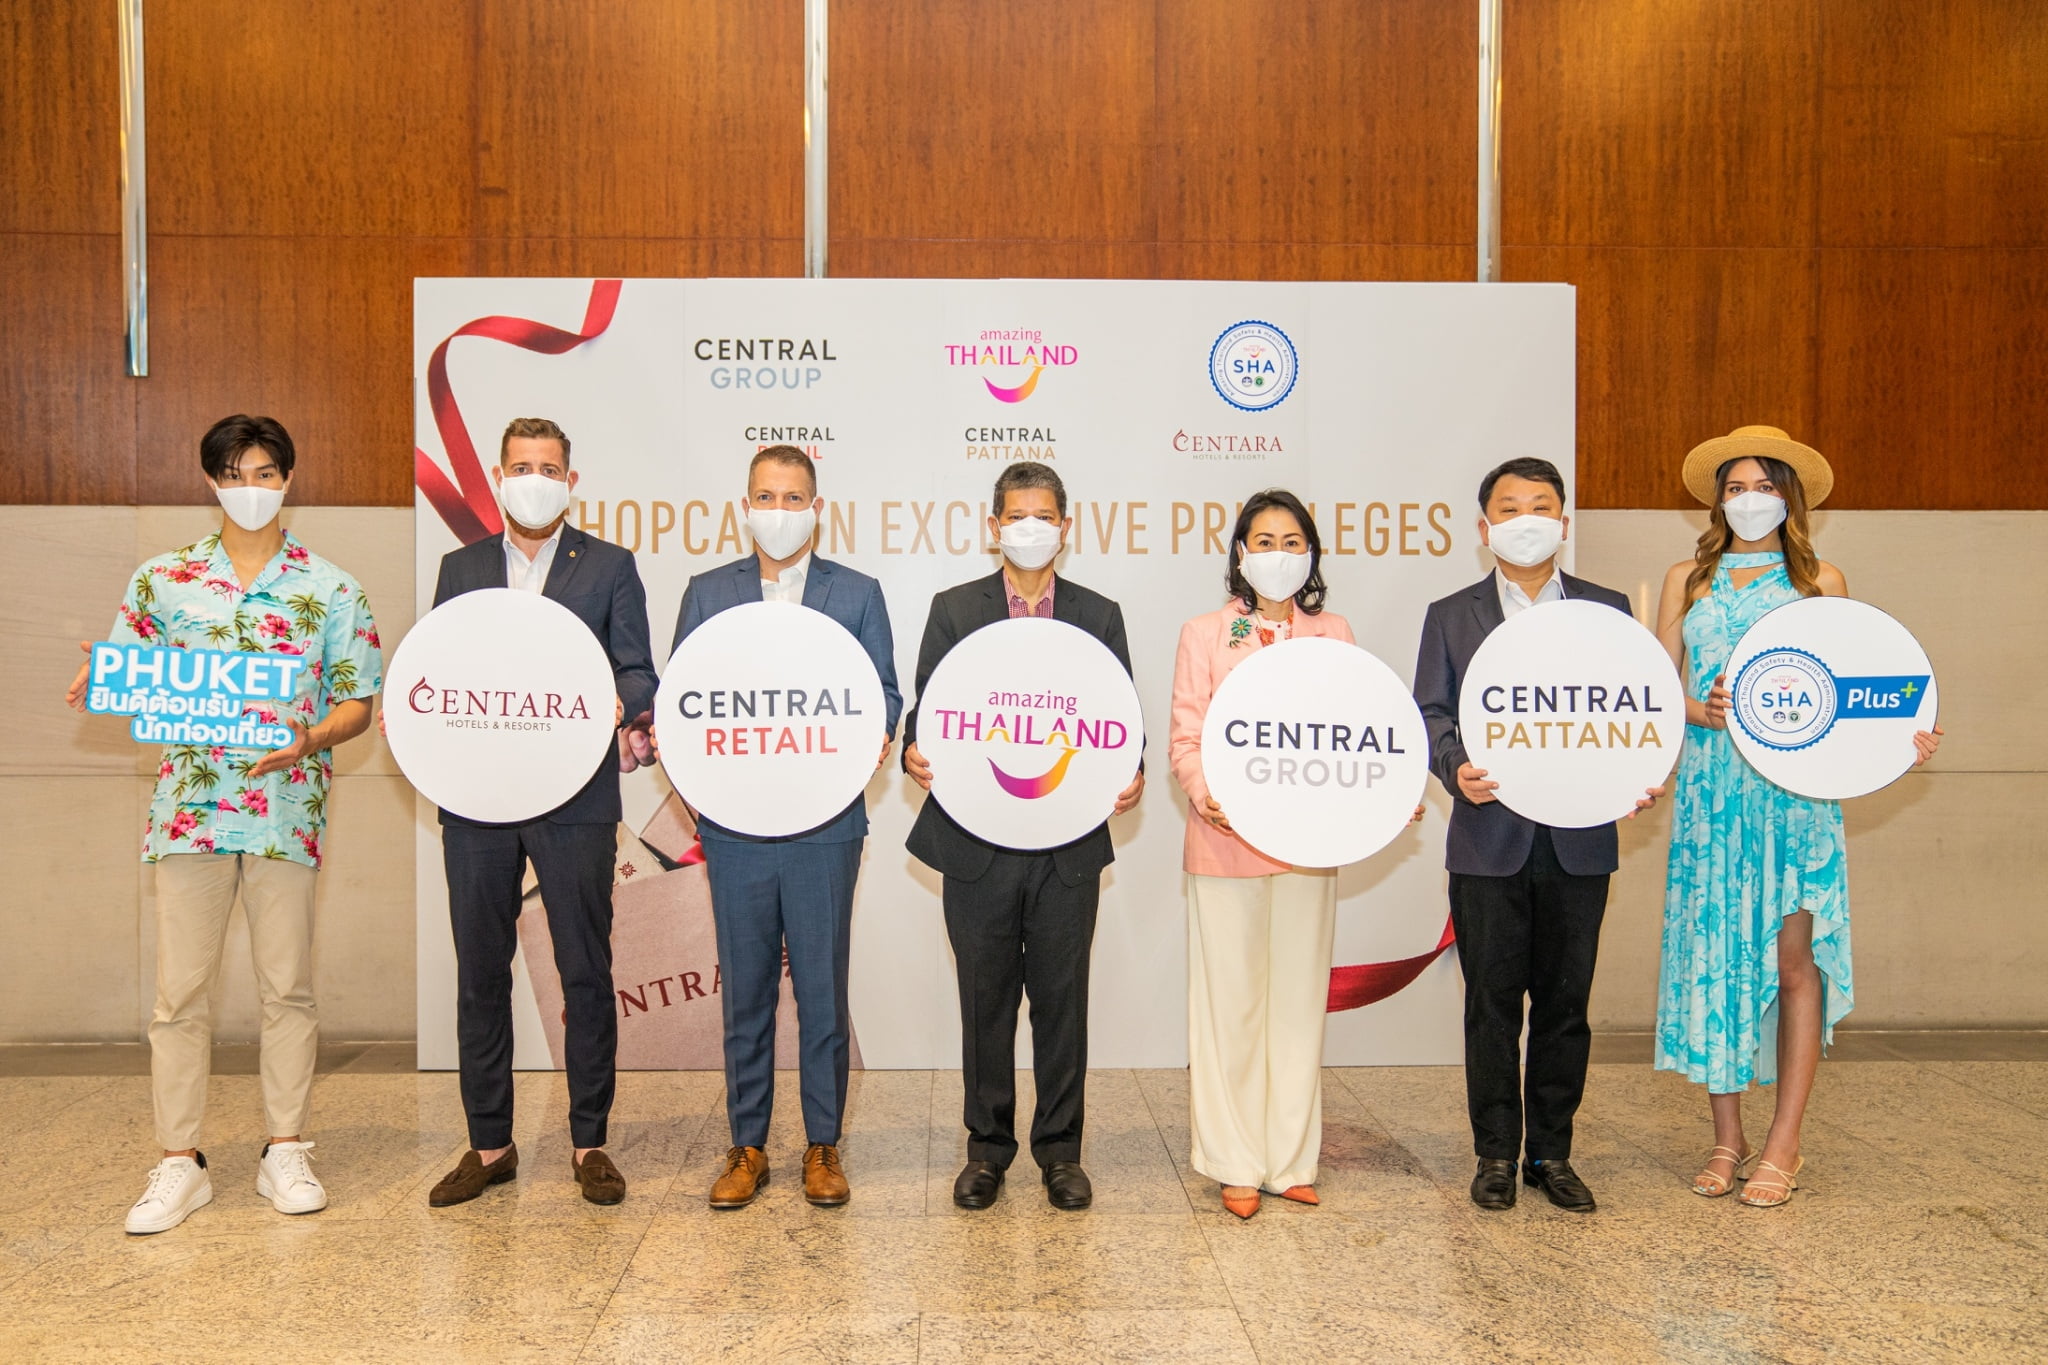 Support central. Central Group Thailand.